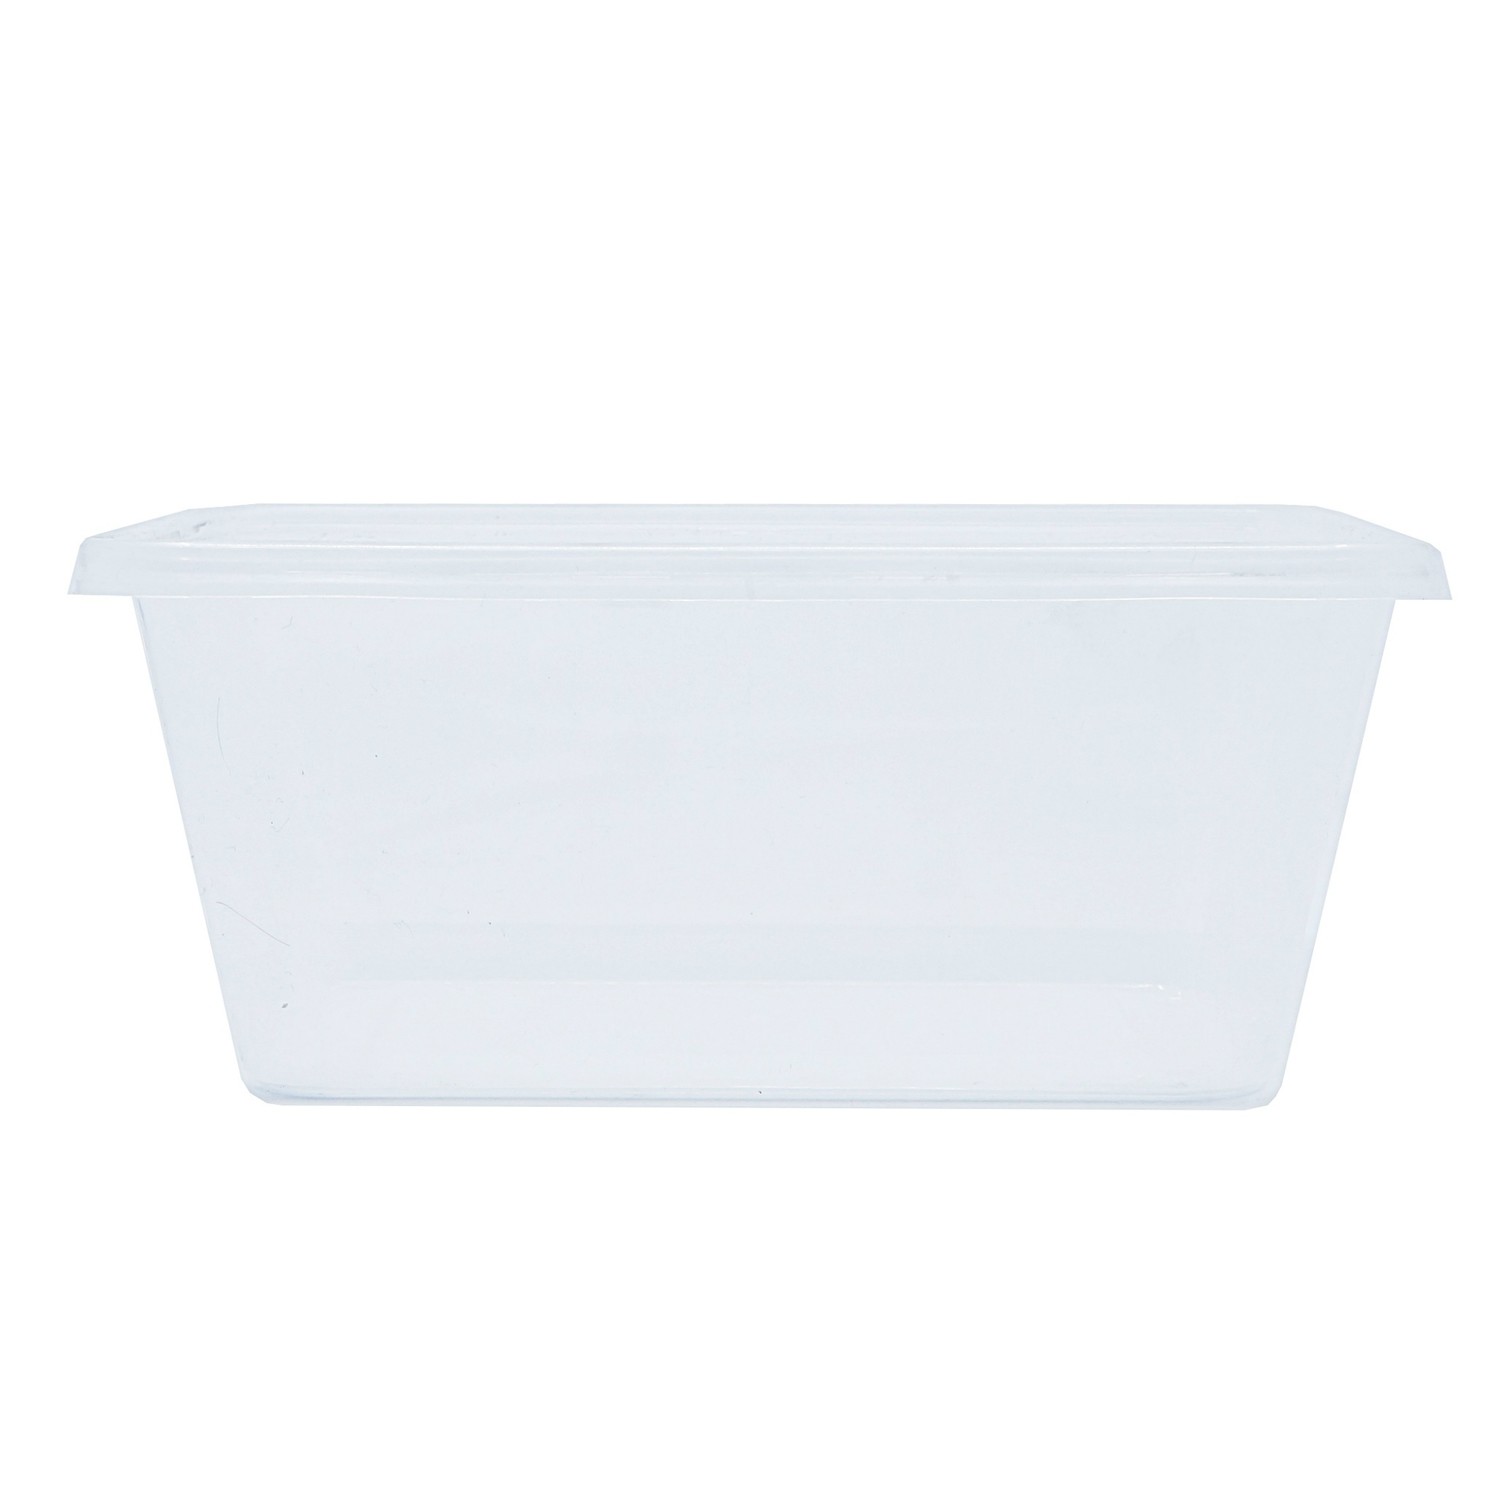 1000ml, Rectangular Microwaveable Container